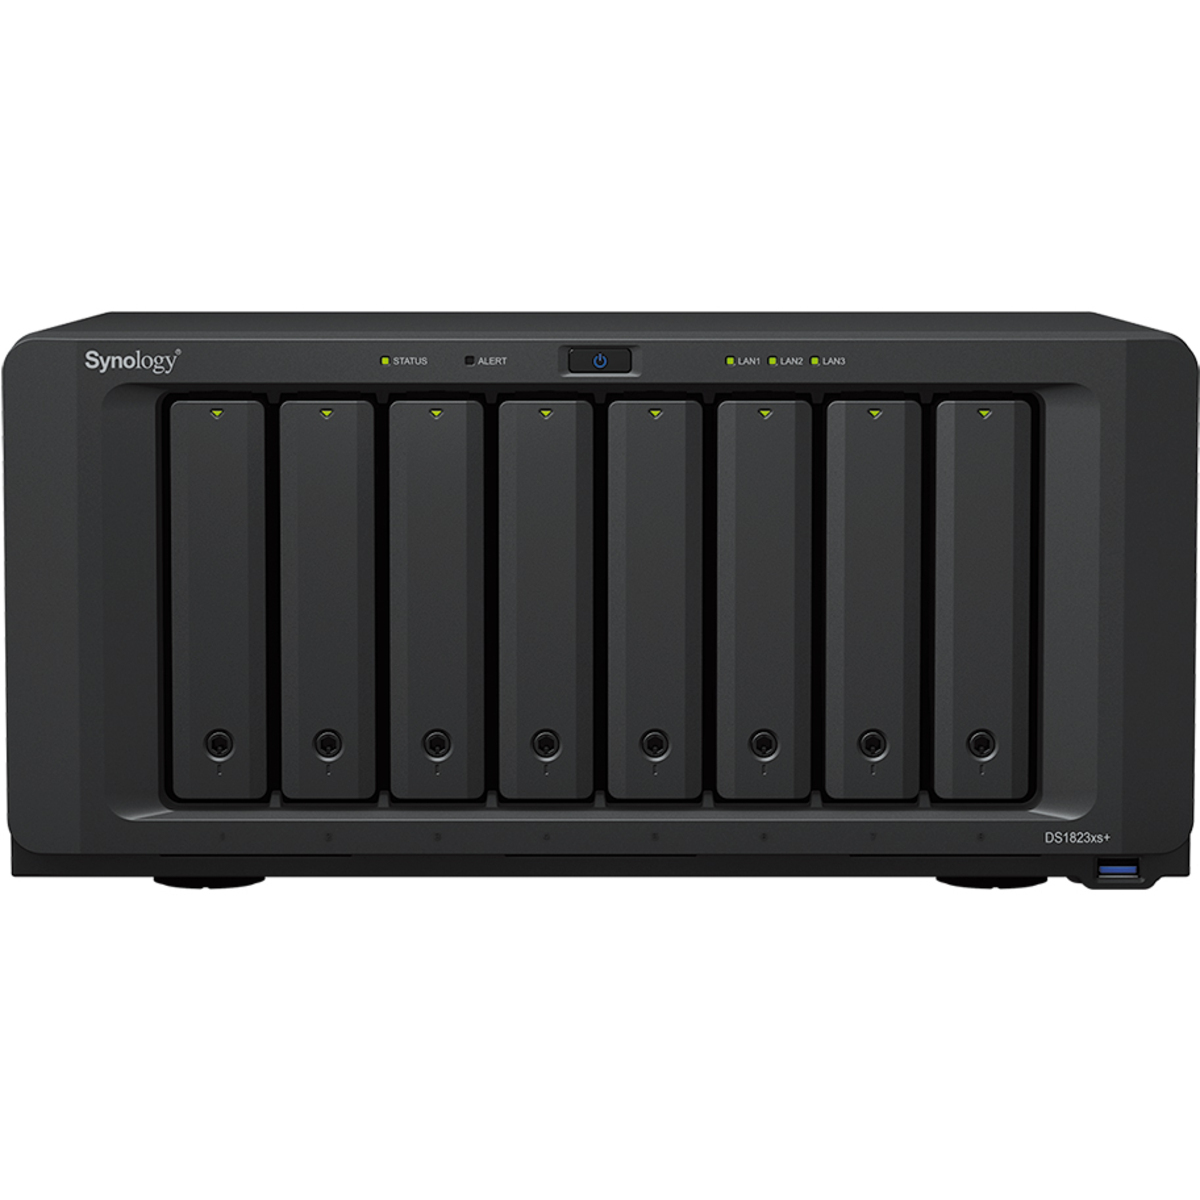 Synology DiskStation DS1823xs+ 36tb 8-Bay Desktop Multimedia / Power User / Business NAS - Network Attached Storage Device 6x6tb Western Digital Red Pro WD6003FFBX 3.5 7200rpm SATA 6Gb/s HDD NAS Class Drives Installed - Burn-In Tested DiskStation DS1823xs+